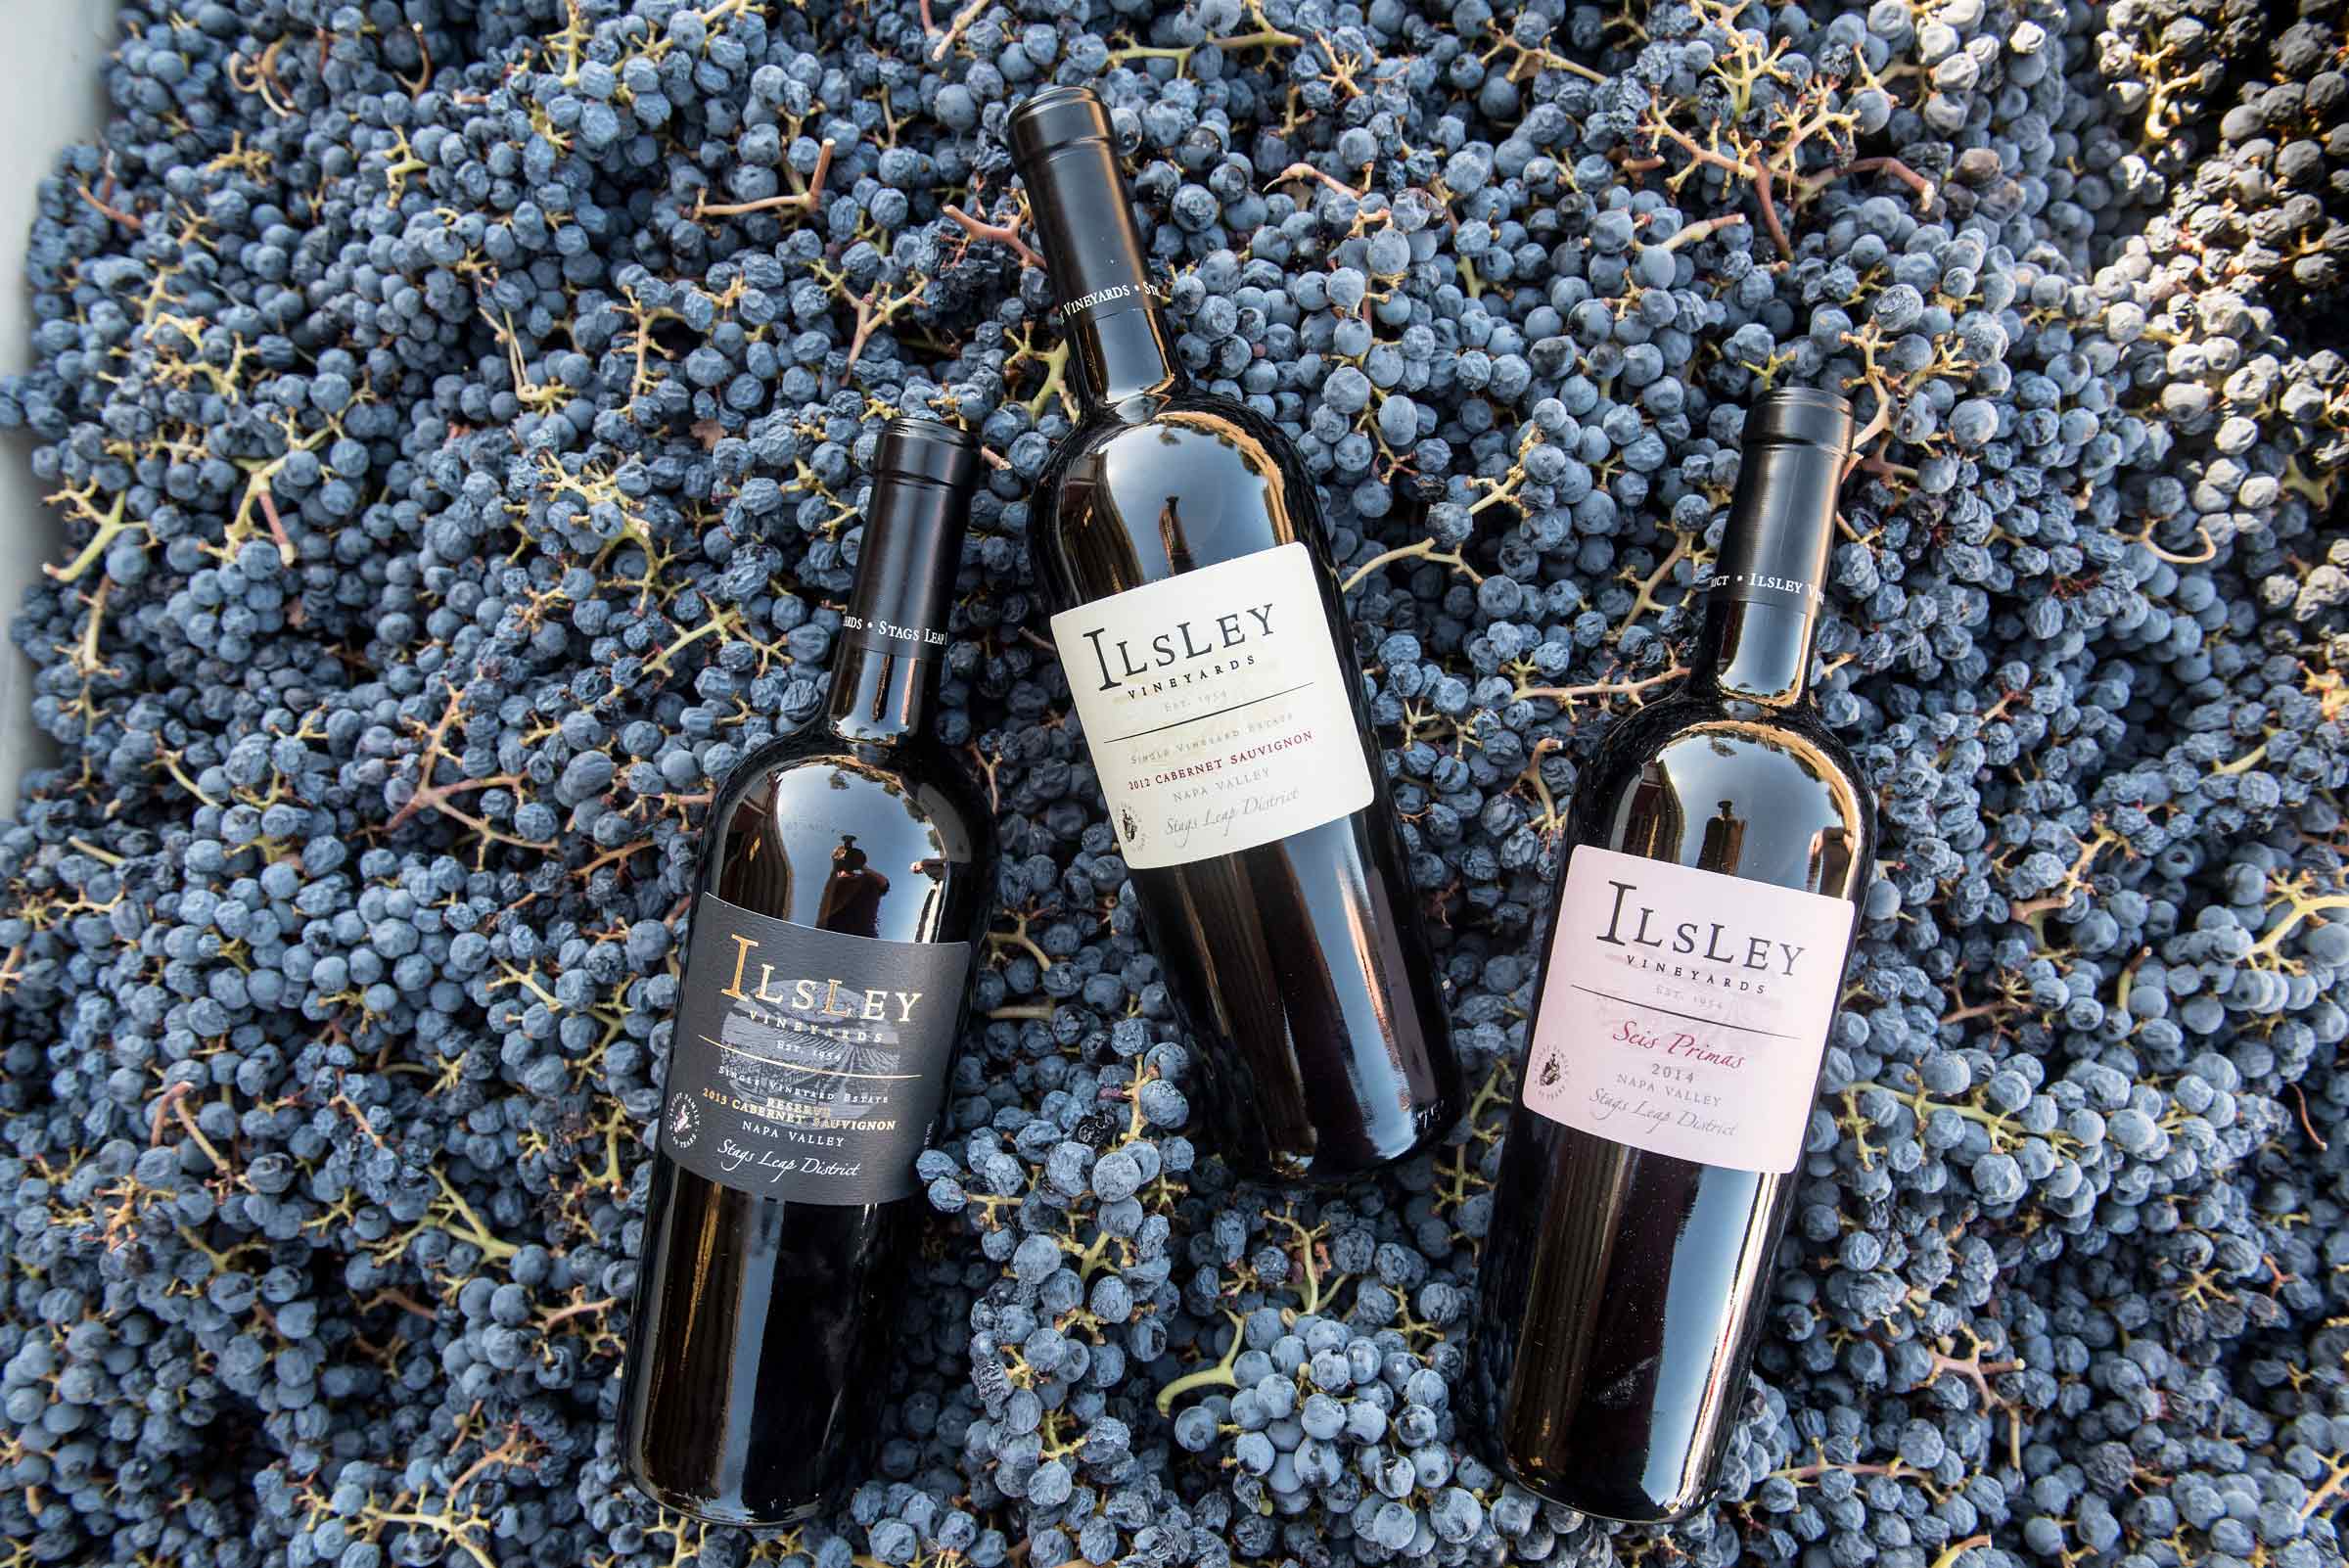 three bottles of Ilsley wine laying on a bin of freshly harvested red grapes